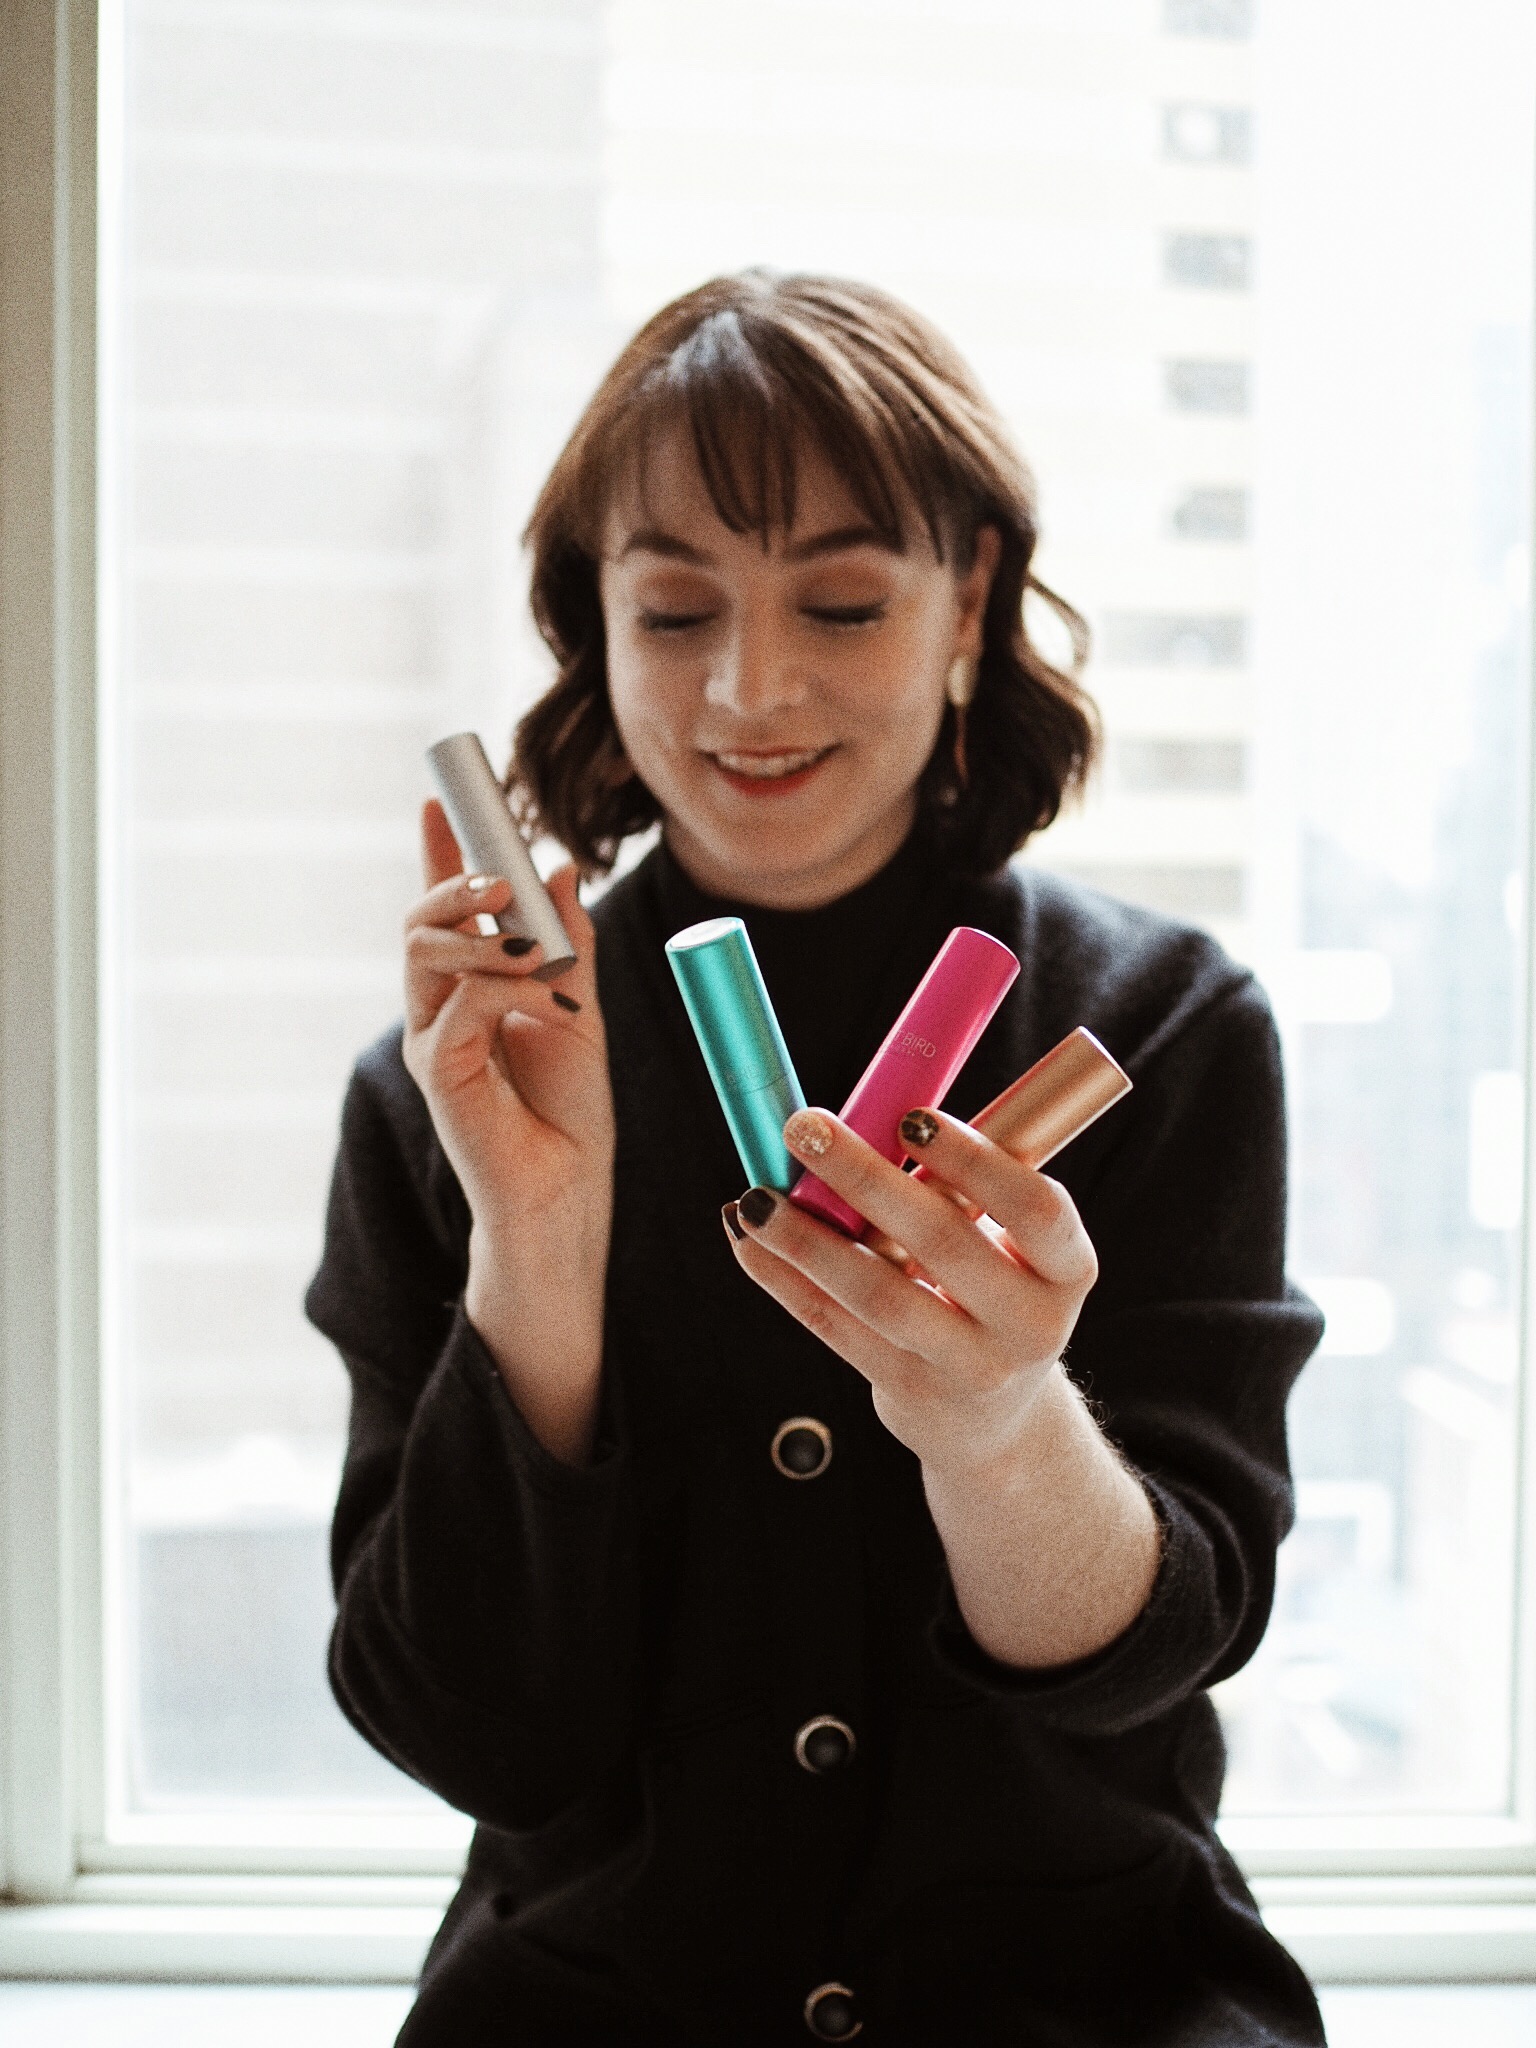 Displaying Scentbird's colorful 30-day supply bottles